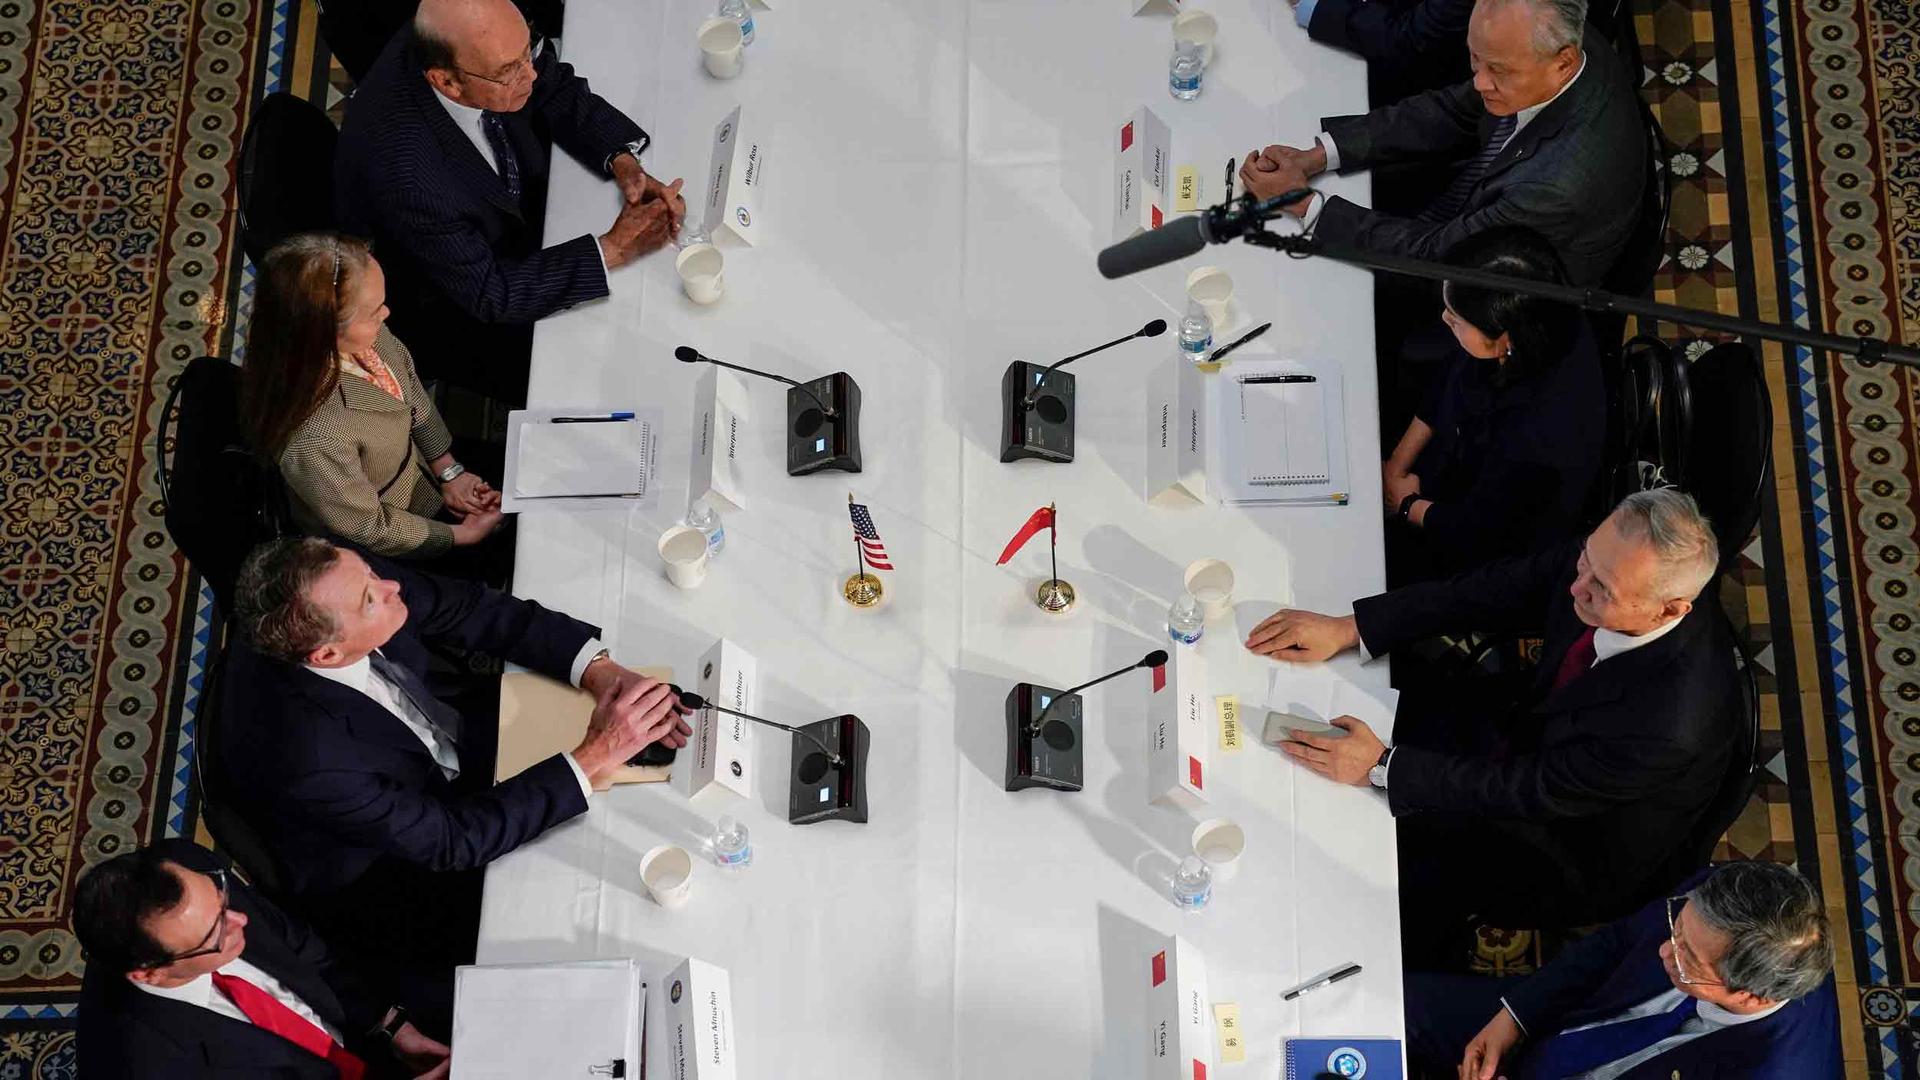 An overhead view of people sitting at a table. In front of each person is a microphone and a name badge.